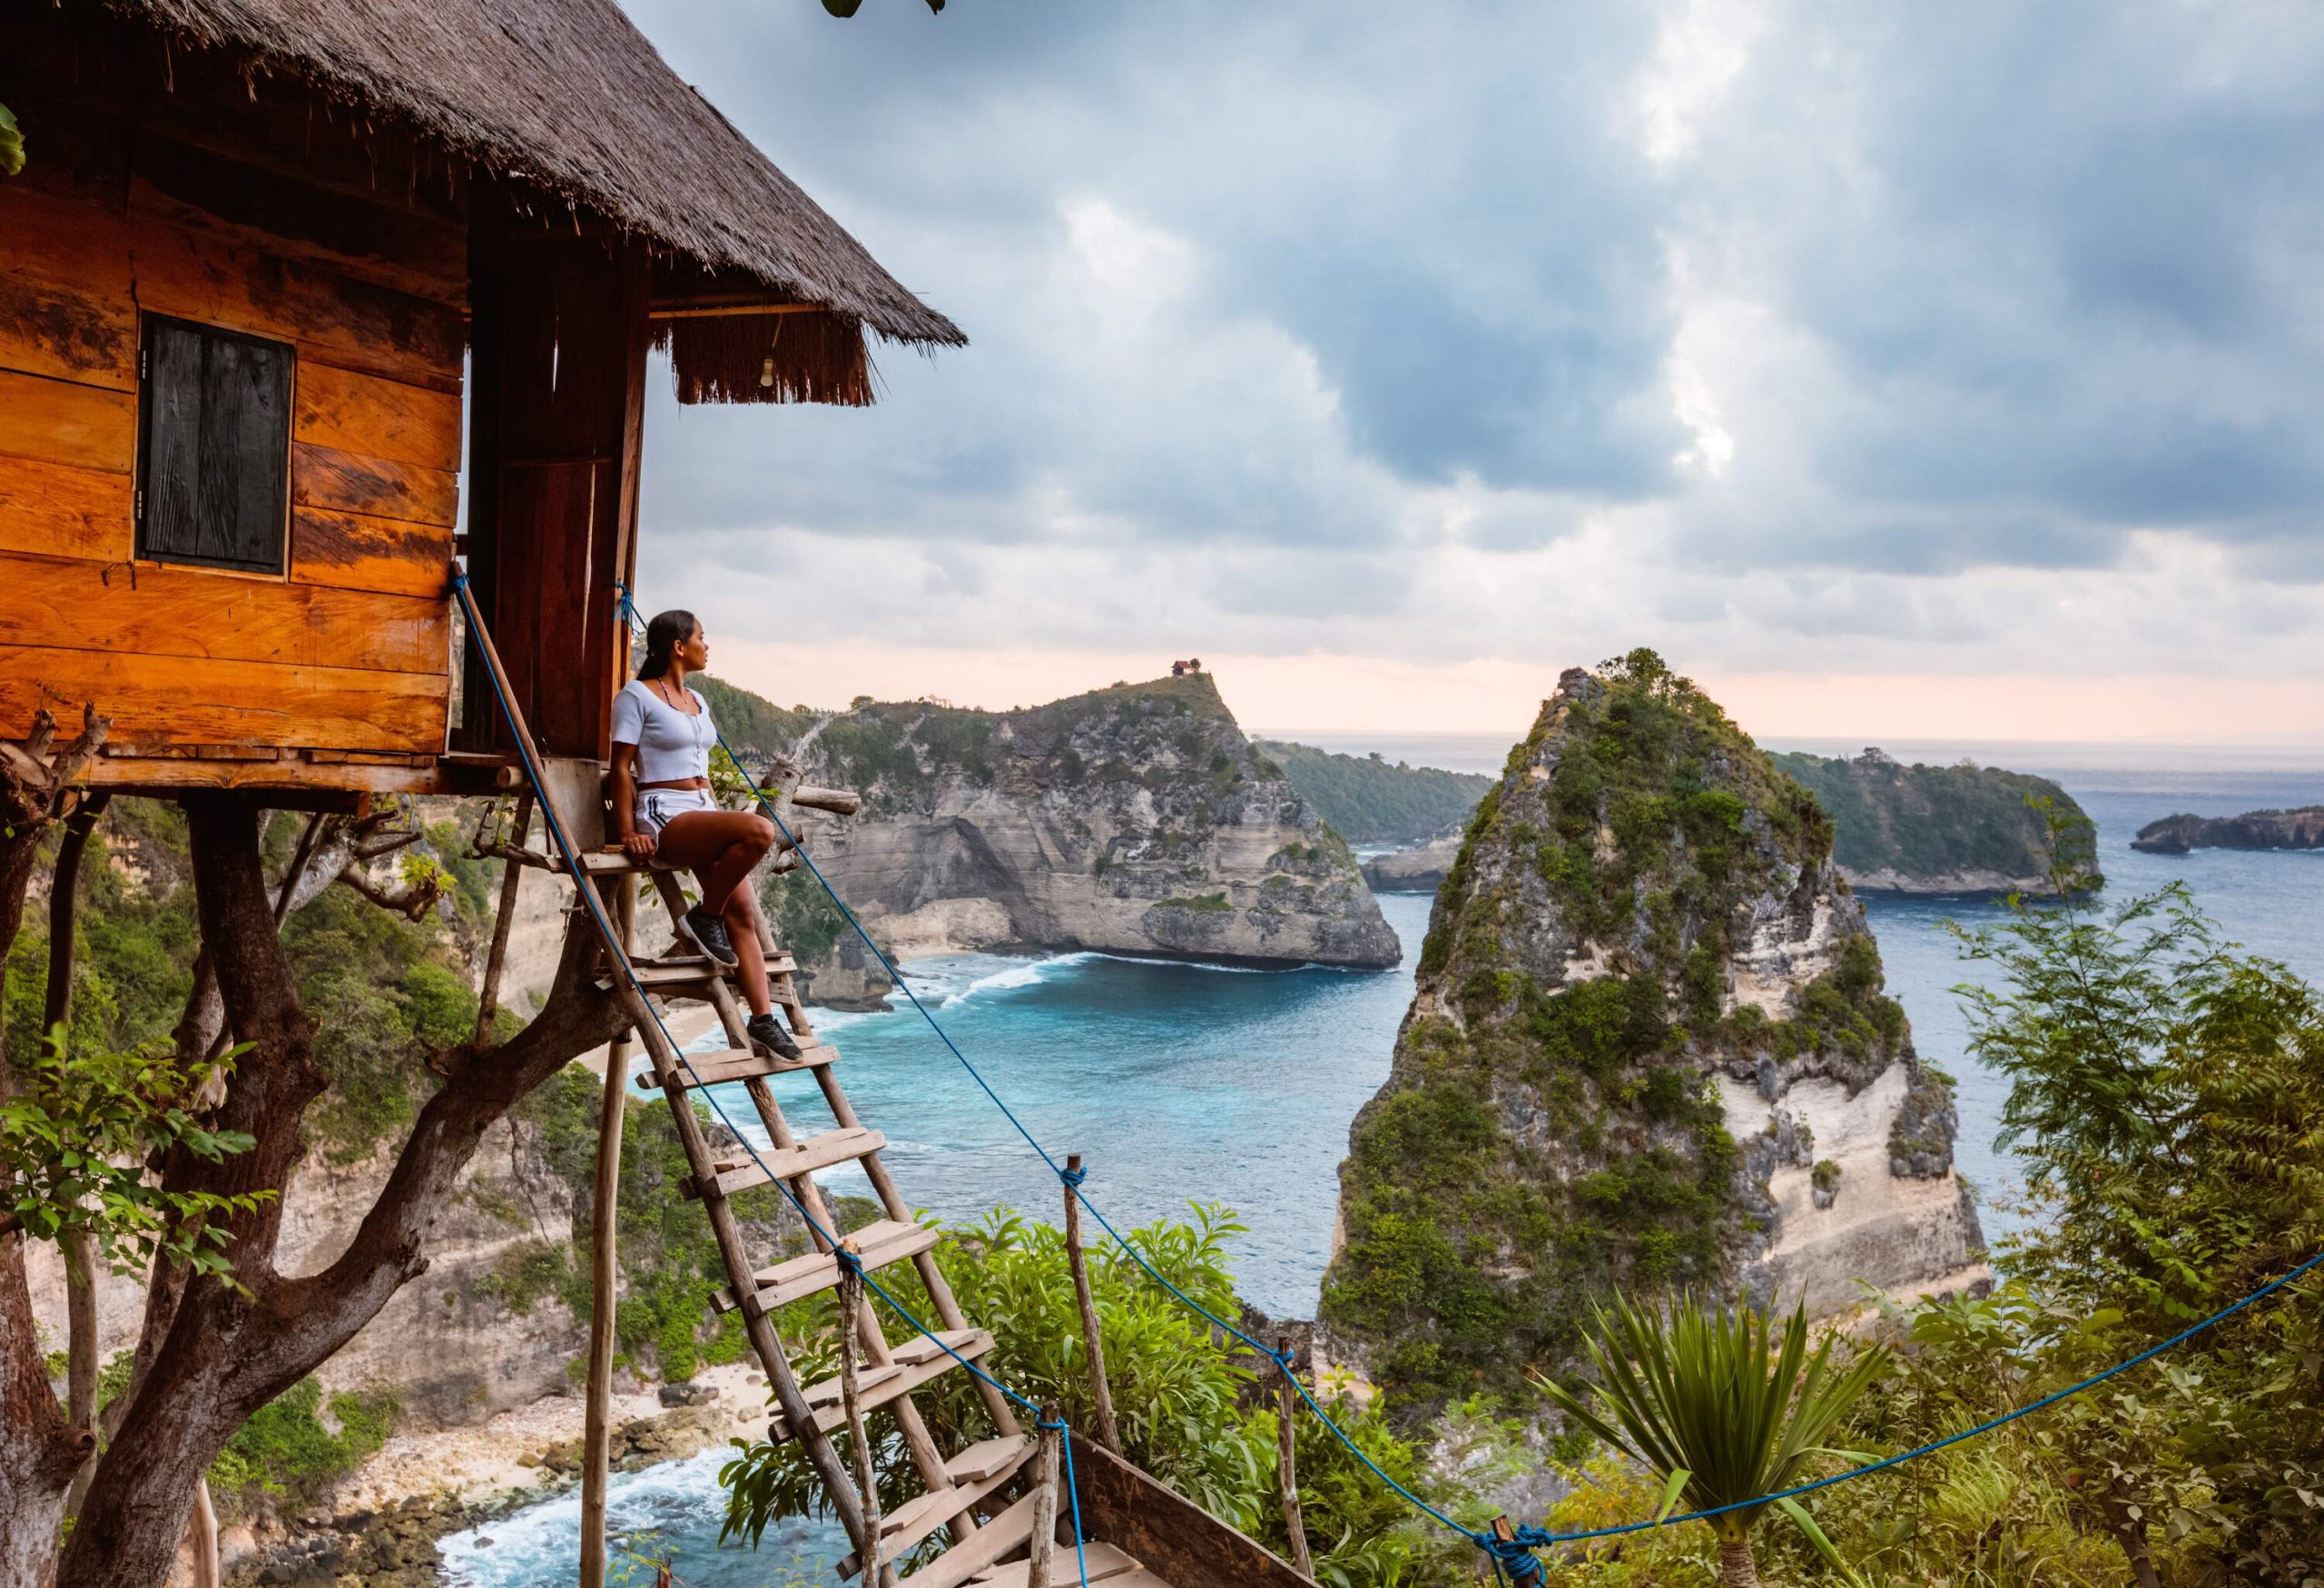 A woman sits on the wooden steps of a wooden tree house and looks out at the lush rocky islands on the blue sea.